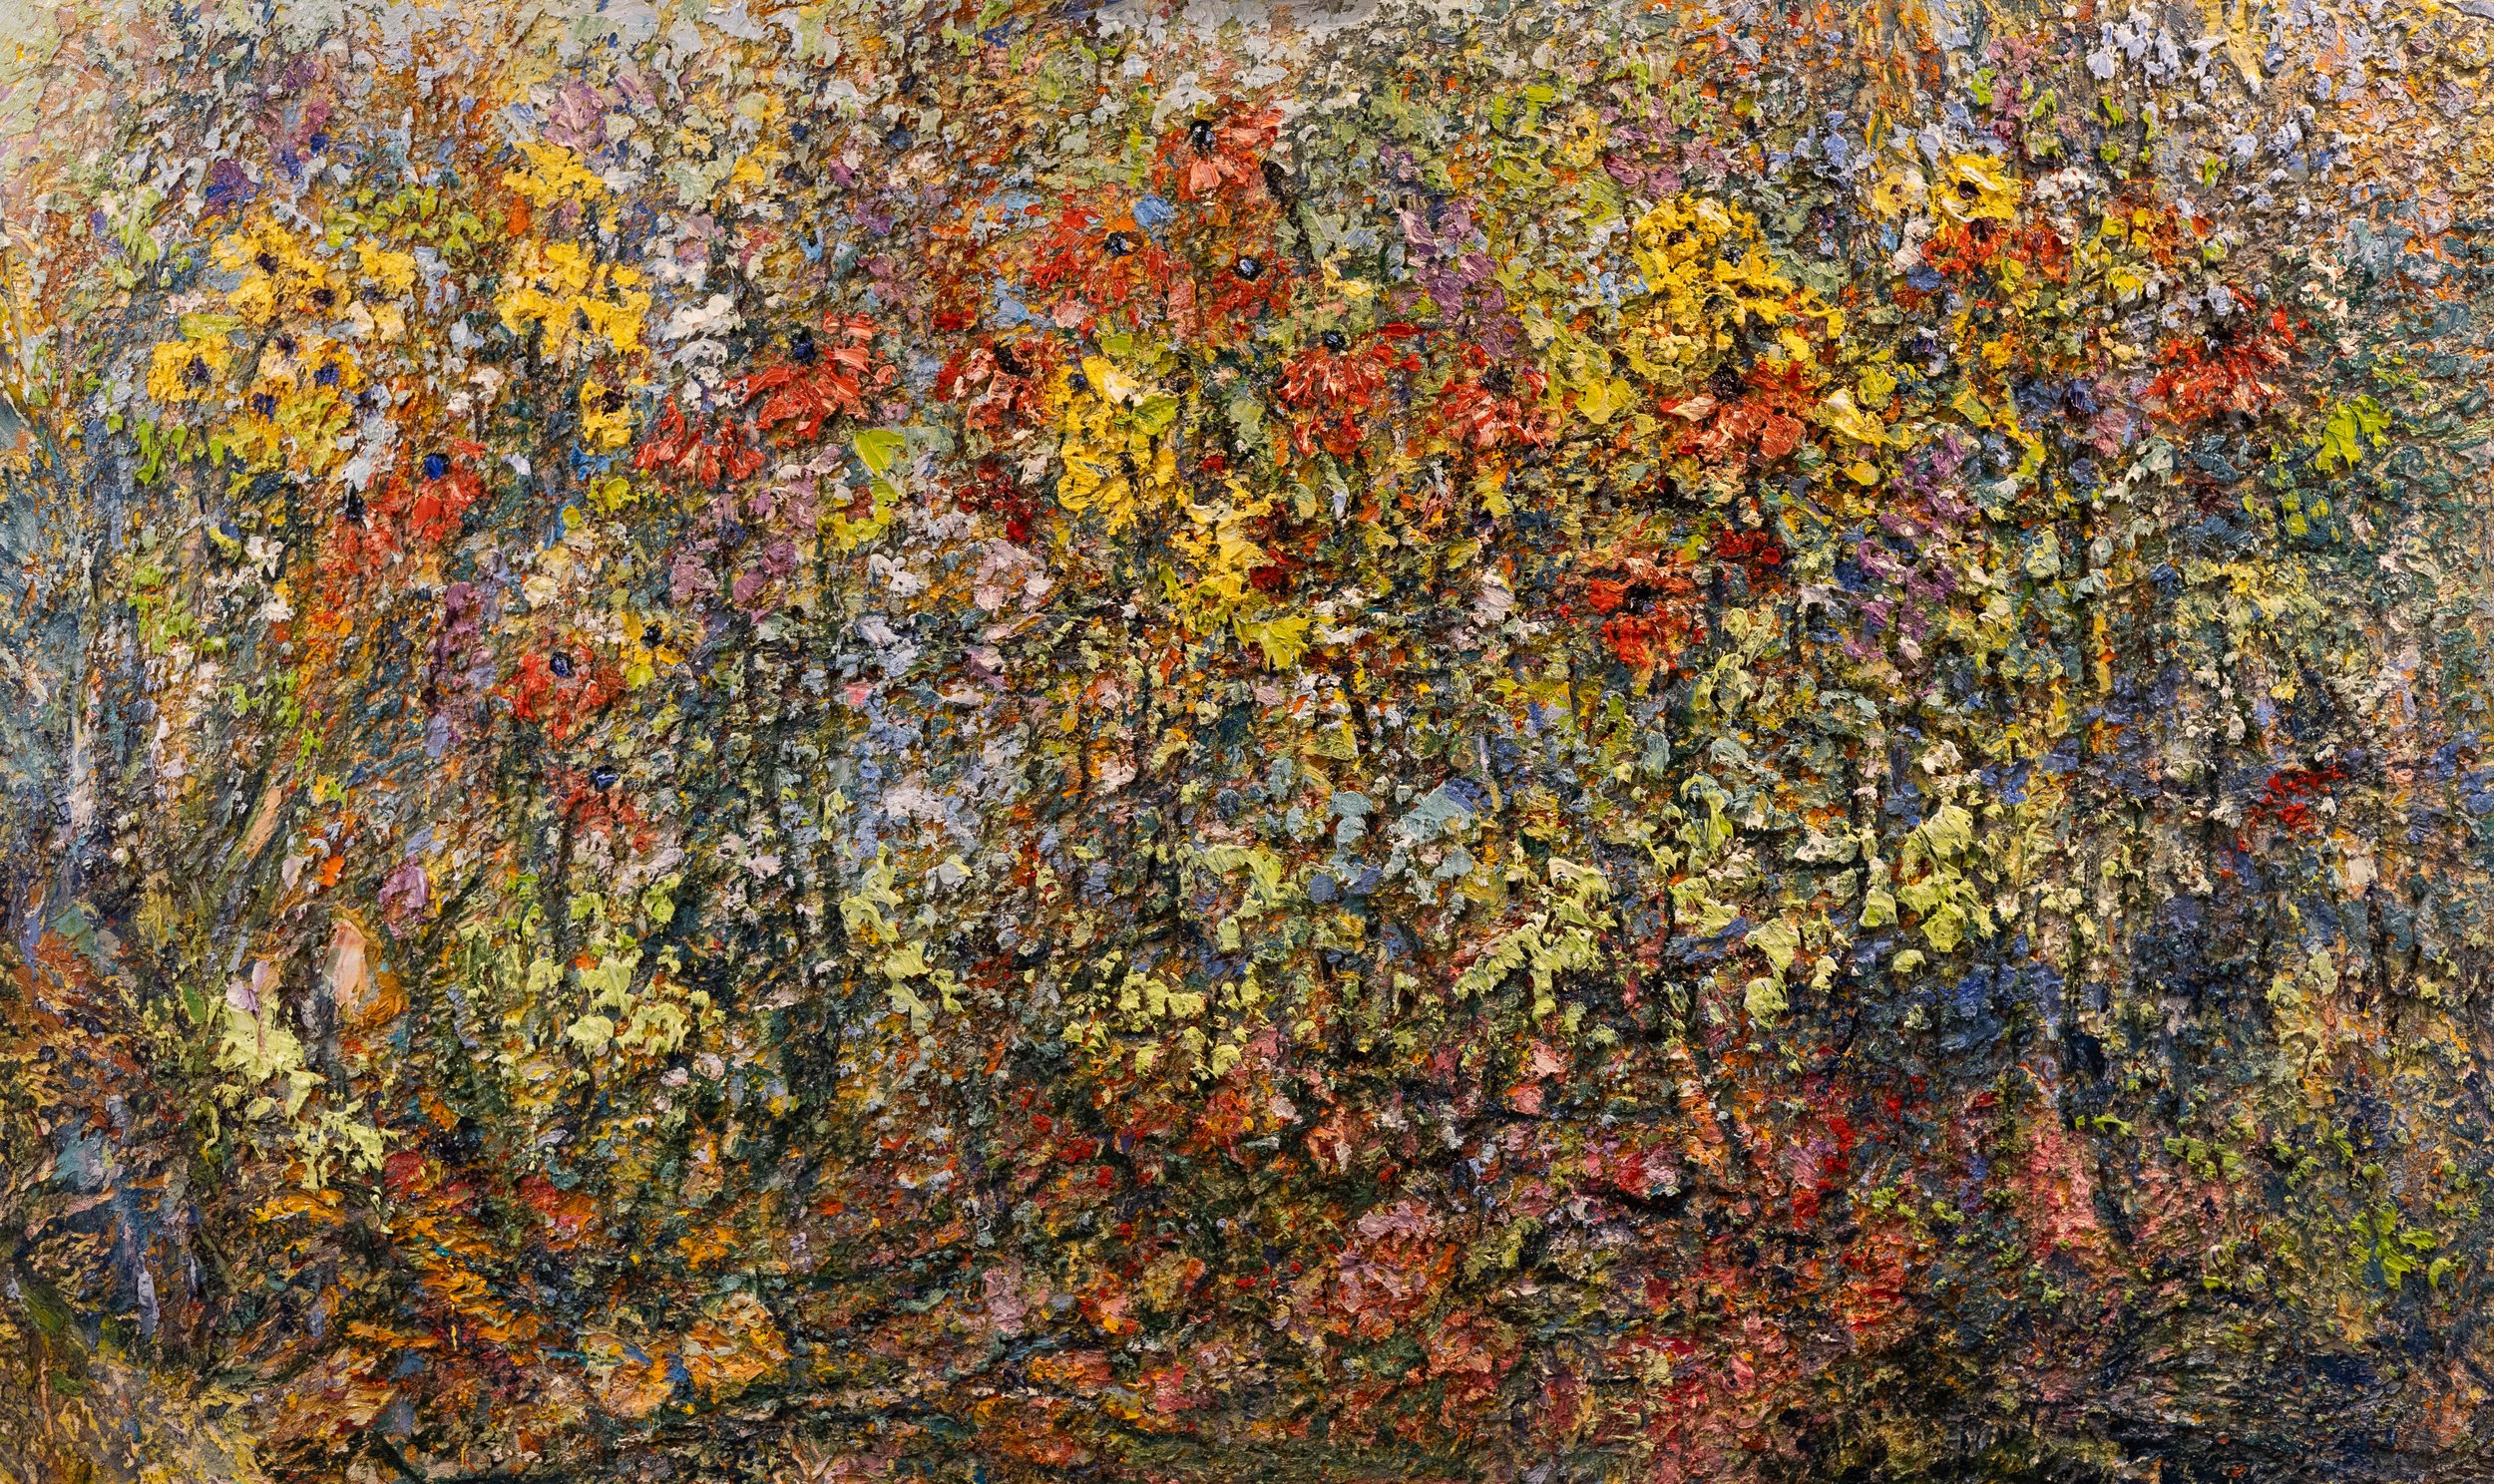   SOLD    Wildflowers   40” x 60”  Oil on canvas    